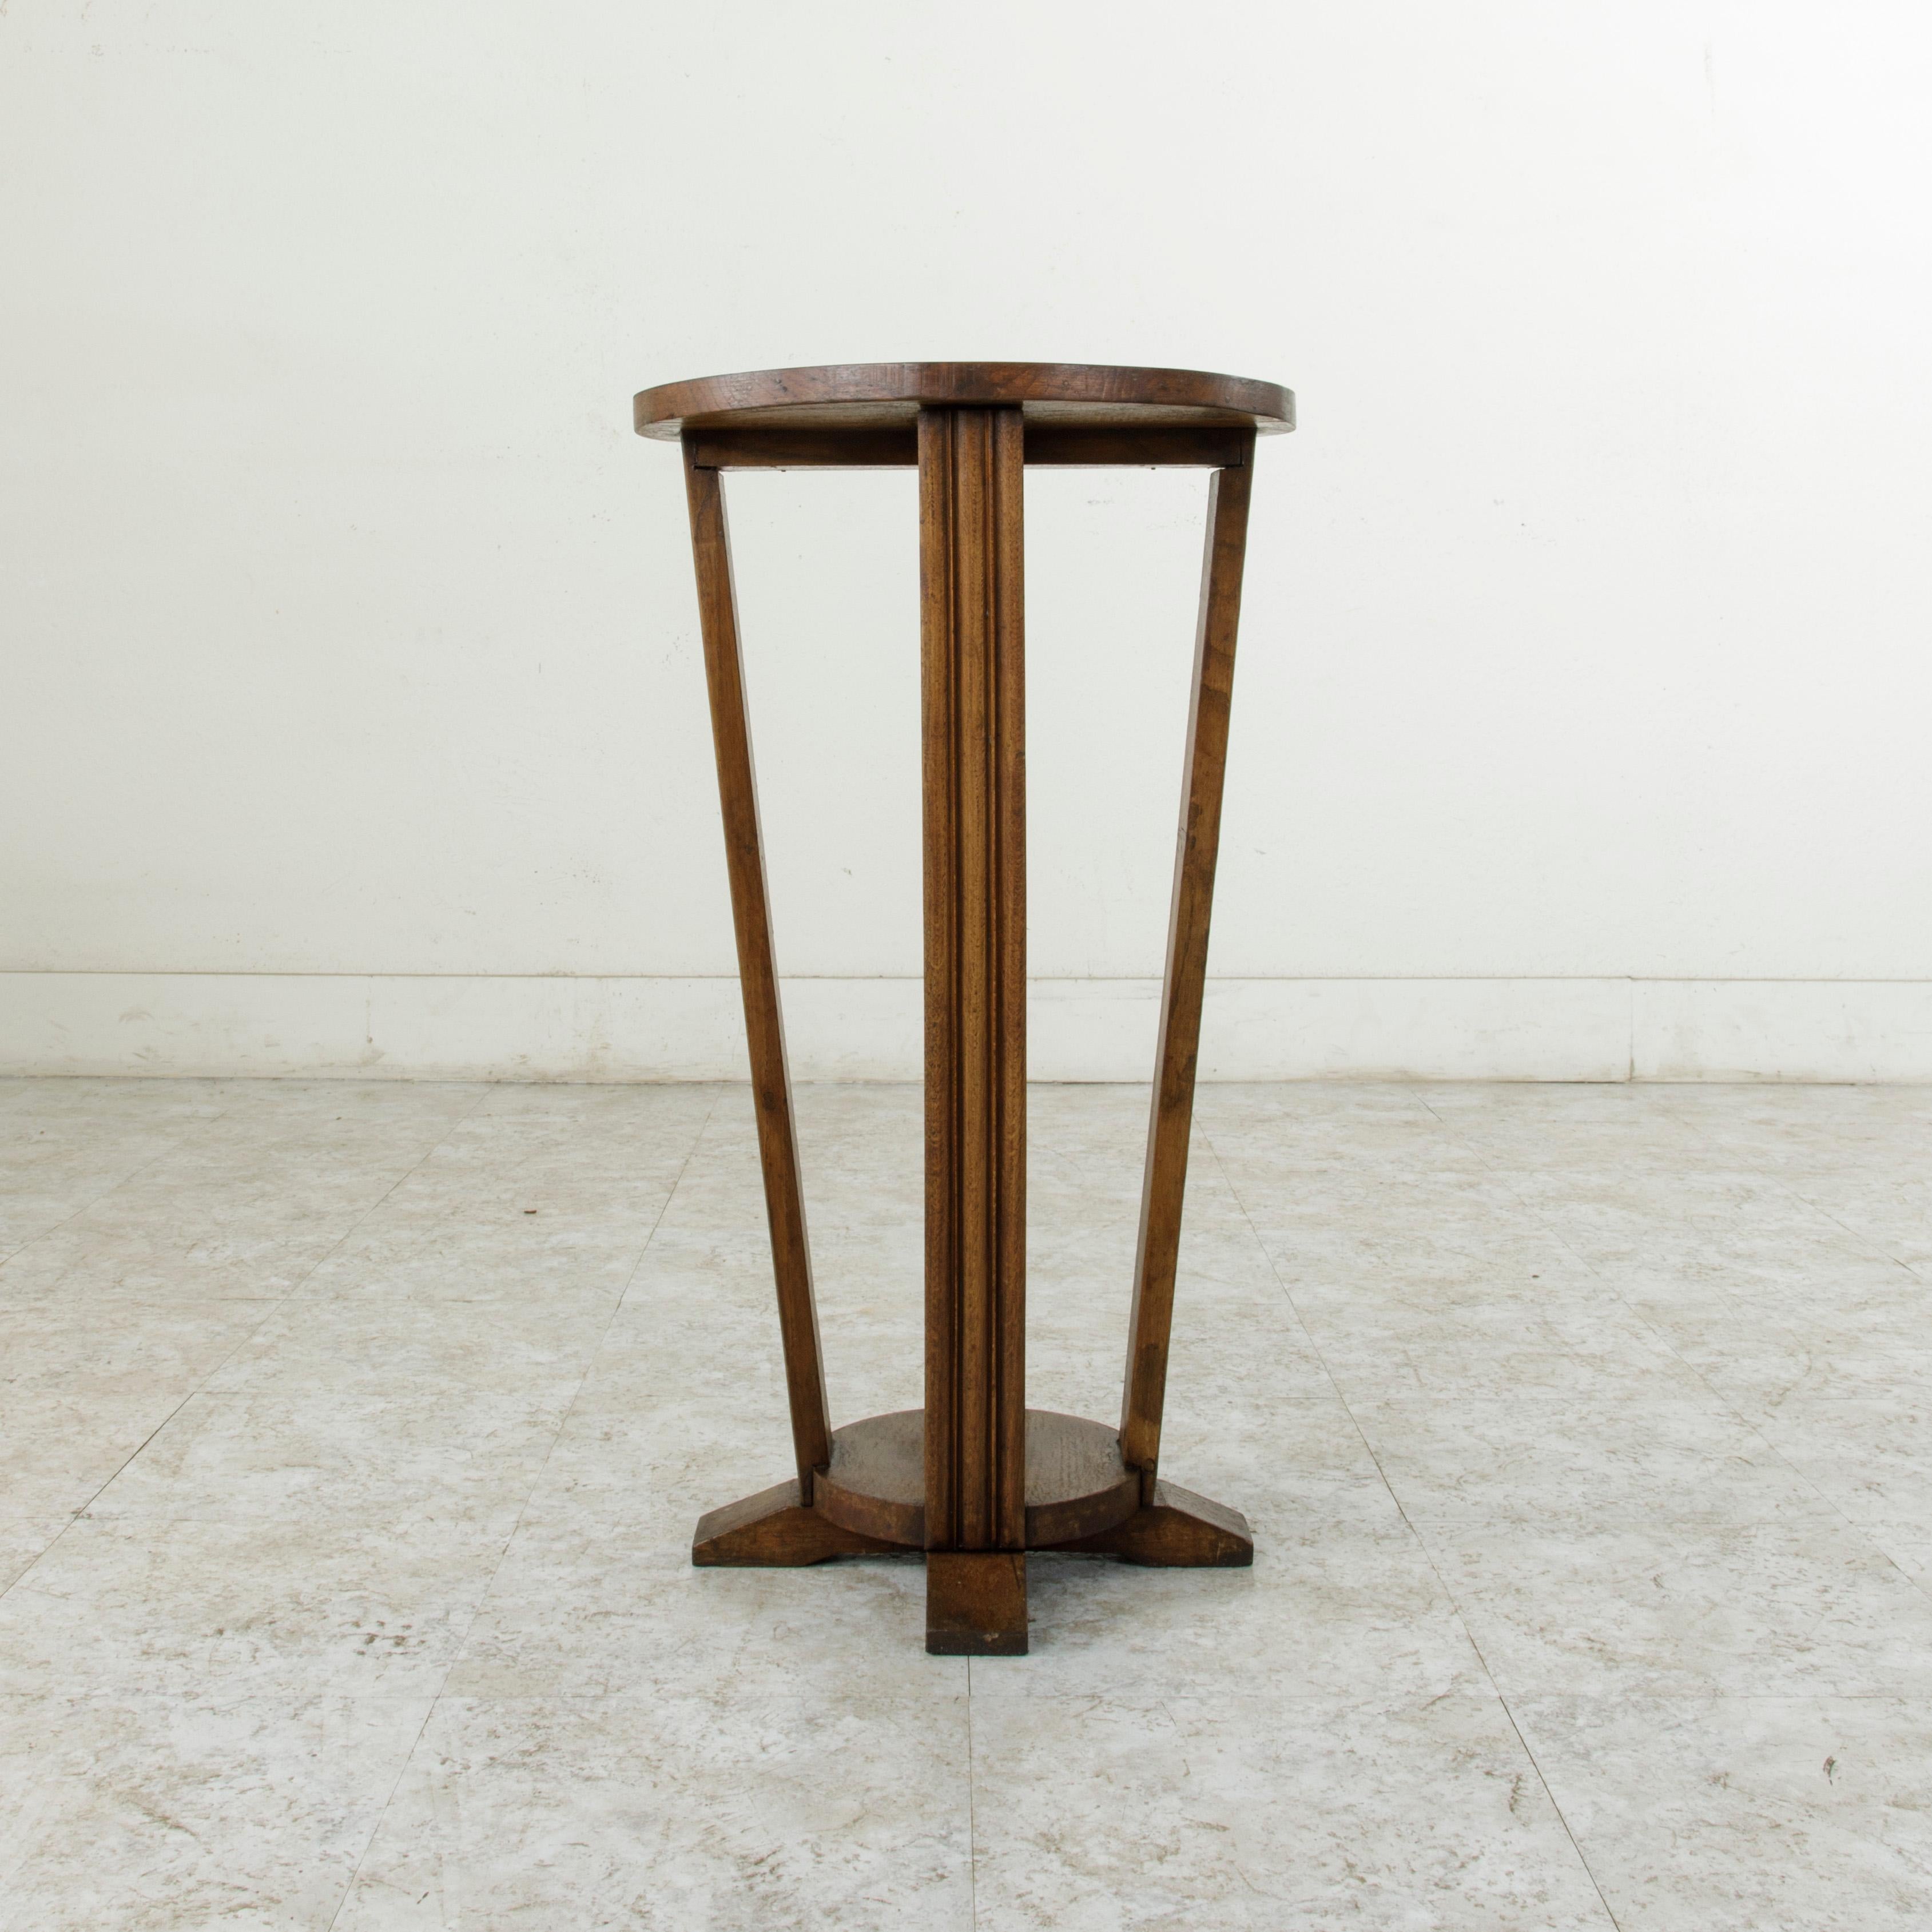 Early 20th Century French Art Deco Period Oak Pedestal, Side Table, Fern Stand im Zustand „Gut“ in Fayetteville, AR